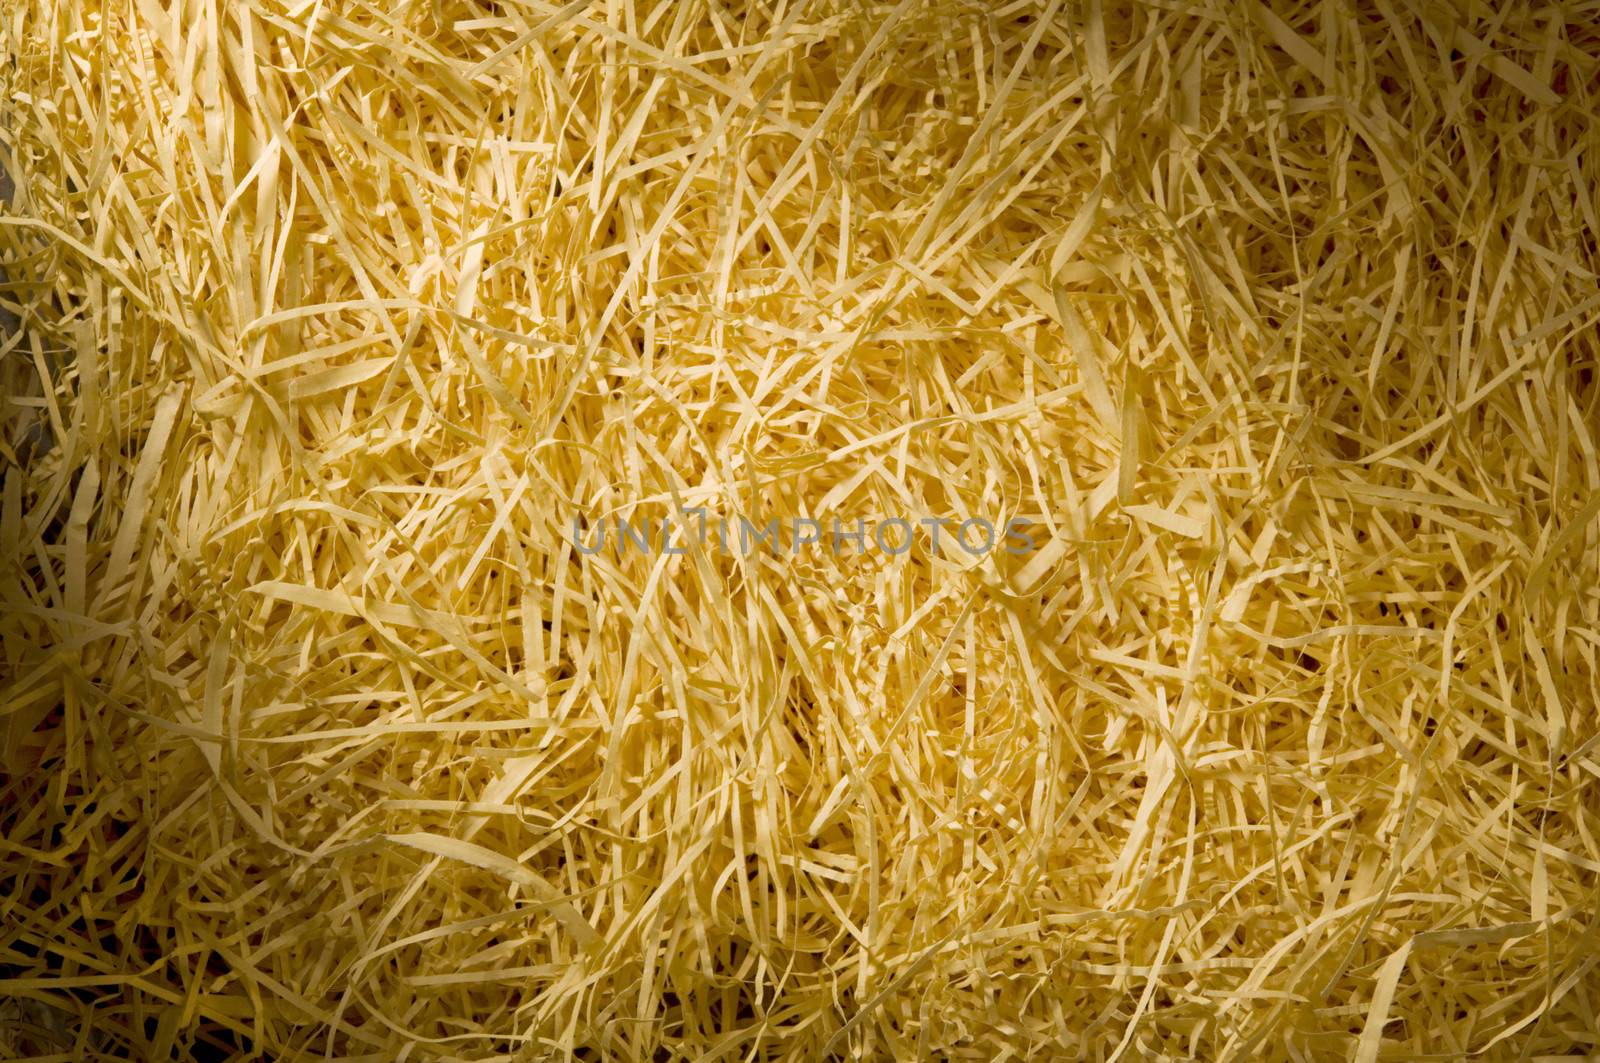 Yellow packing straw material lit diagonally by Balefire9